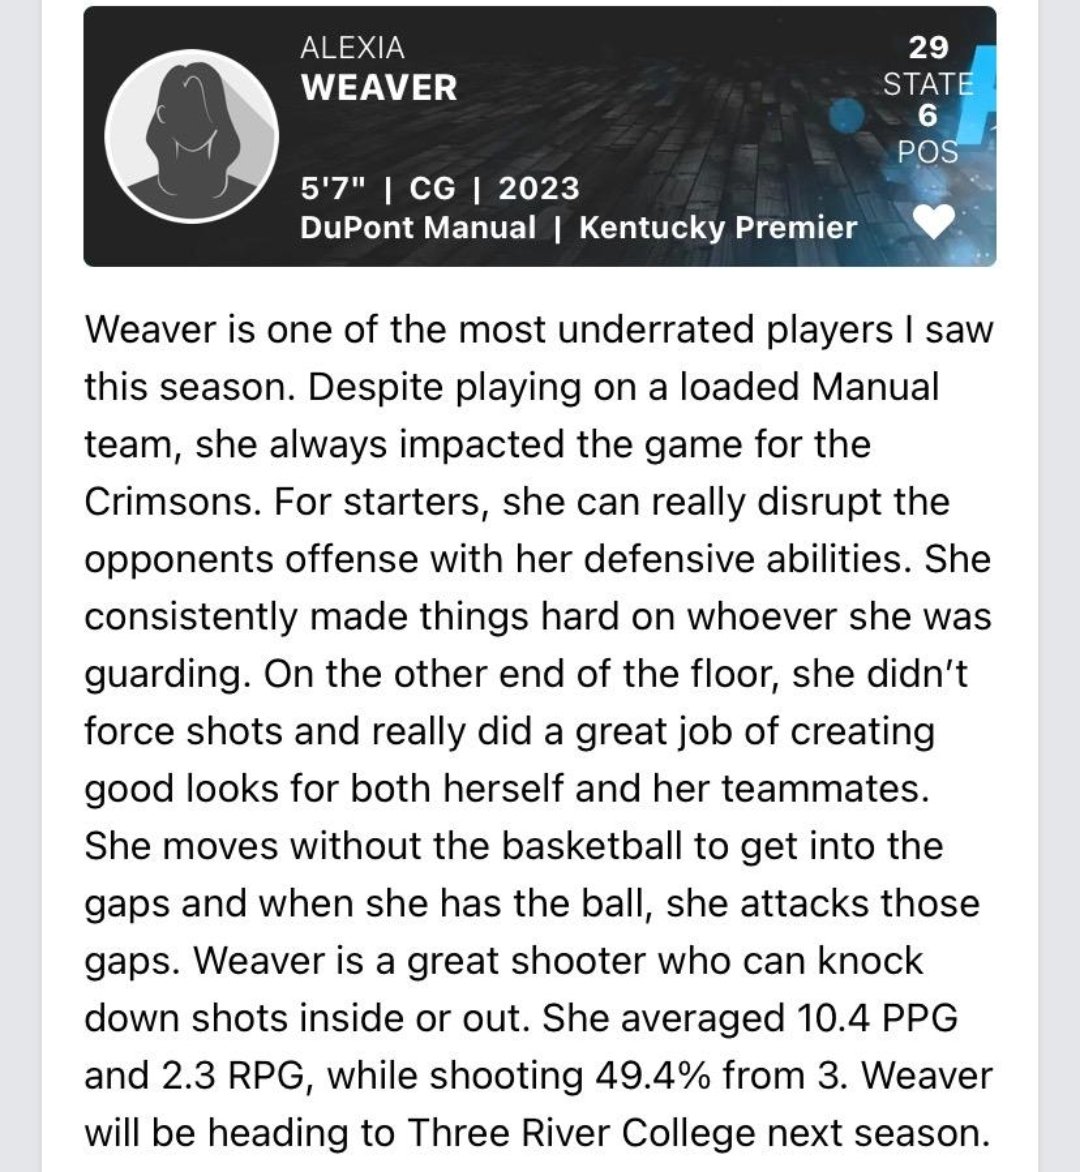 Elated at this!!! Way to go @_lexiweaver10!